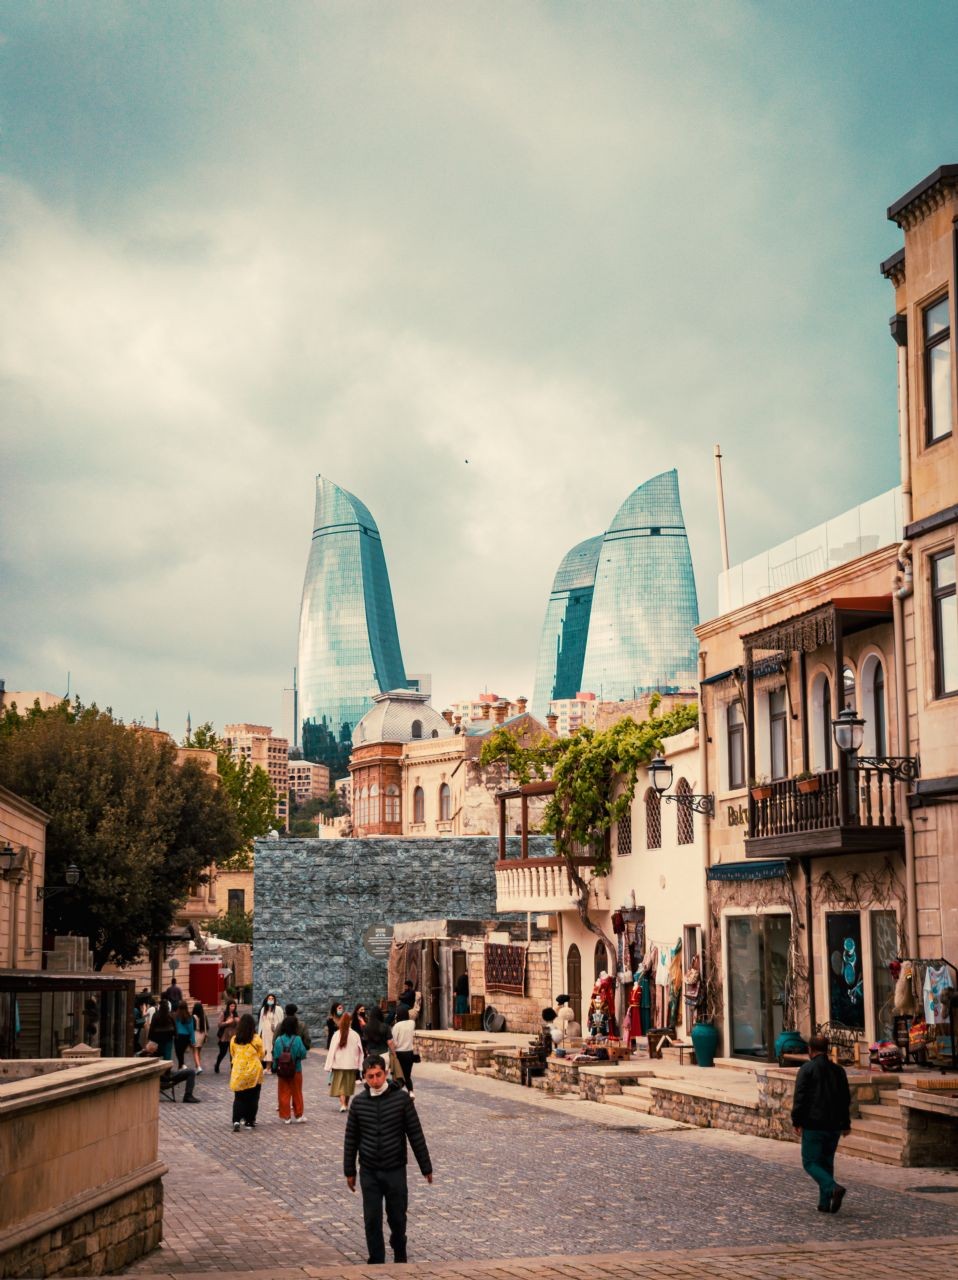 Baku, it's essential to know about the accommodation options available